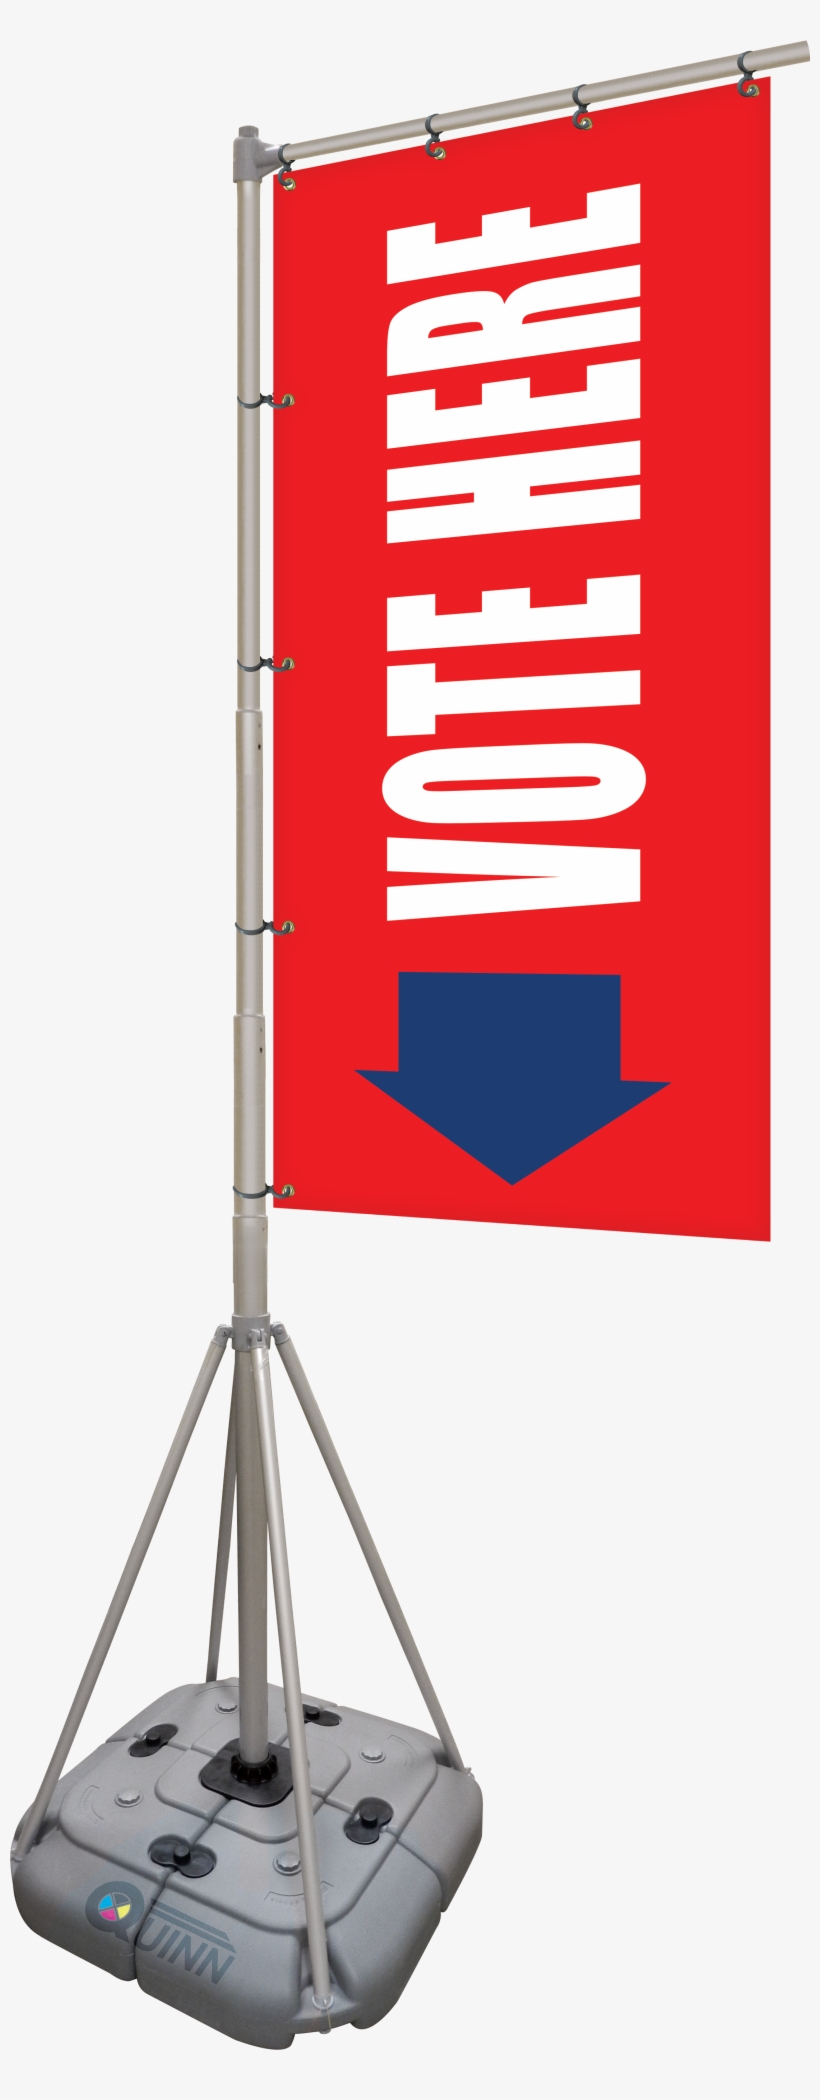 Giant Flag Pole Banners Give Your Next Political Event - 10' Giant Flagpole Kit, transparent png #1350334